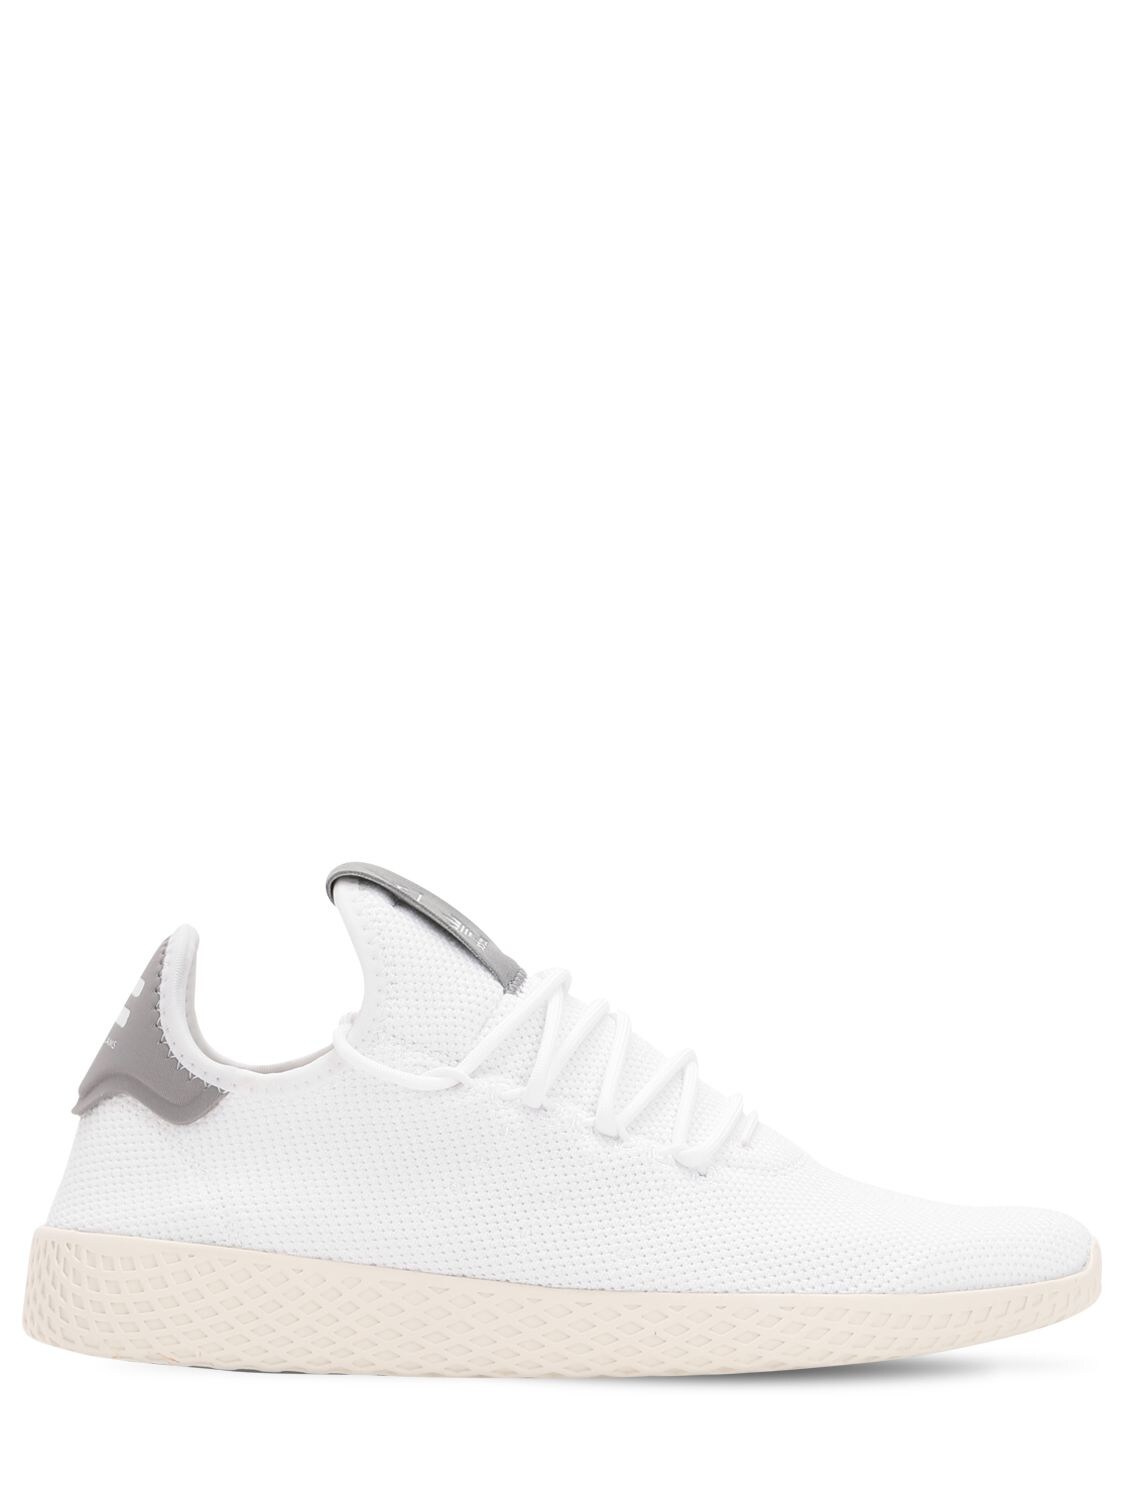 Adidas Originals By Pharrell Williams Pharrell Williams Knit Trainers In White/grey